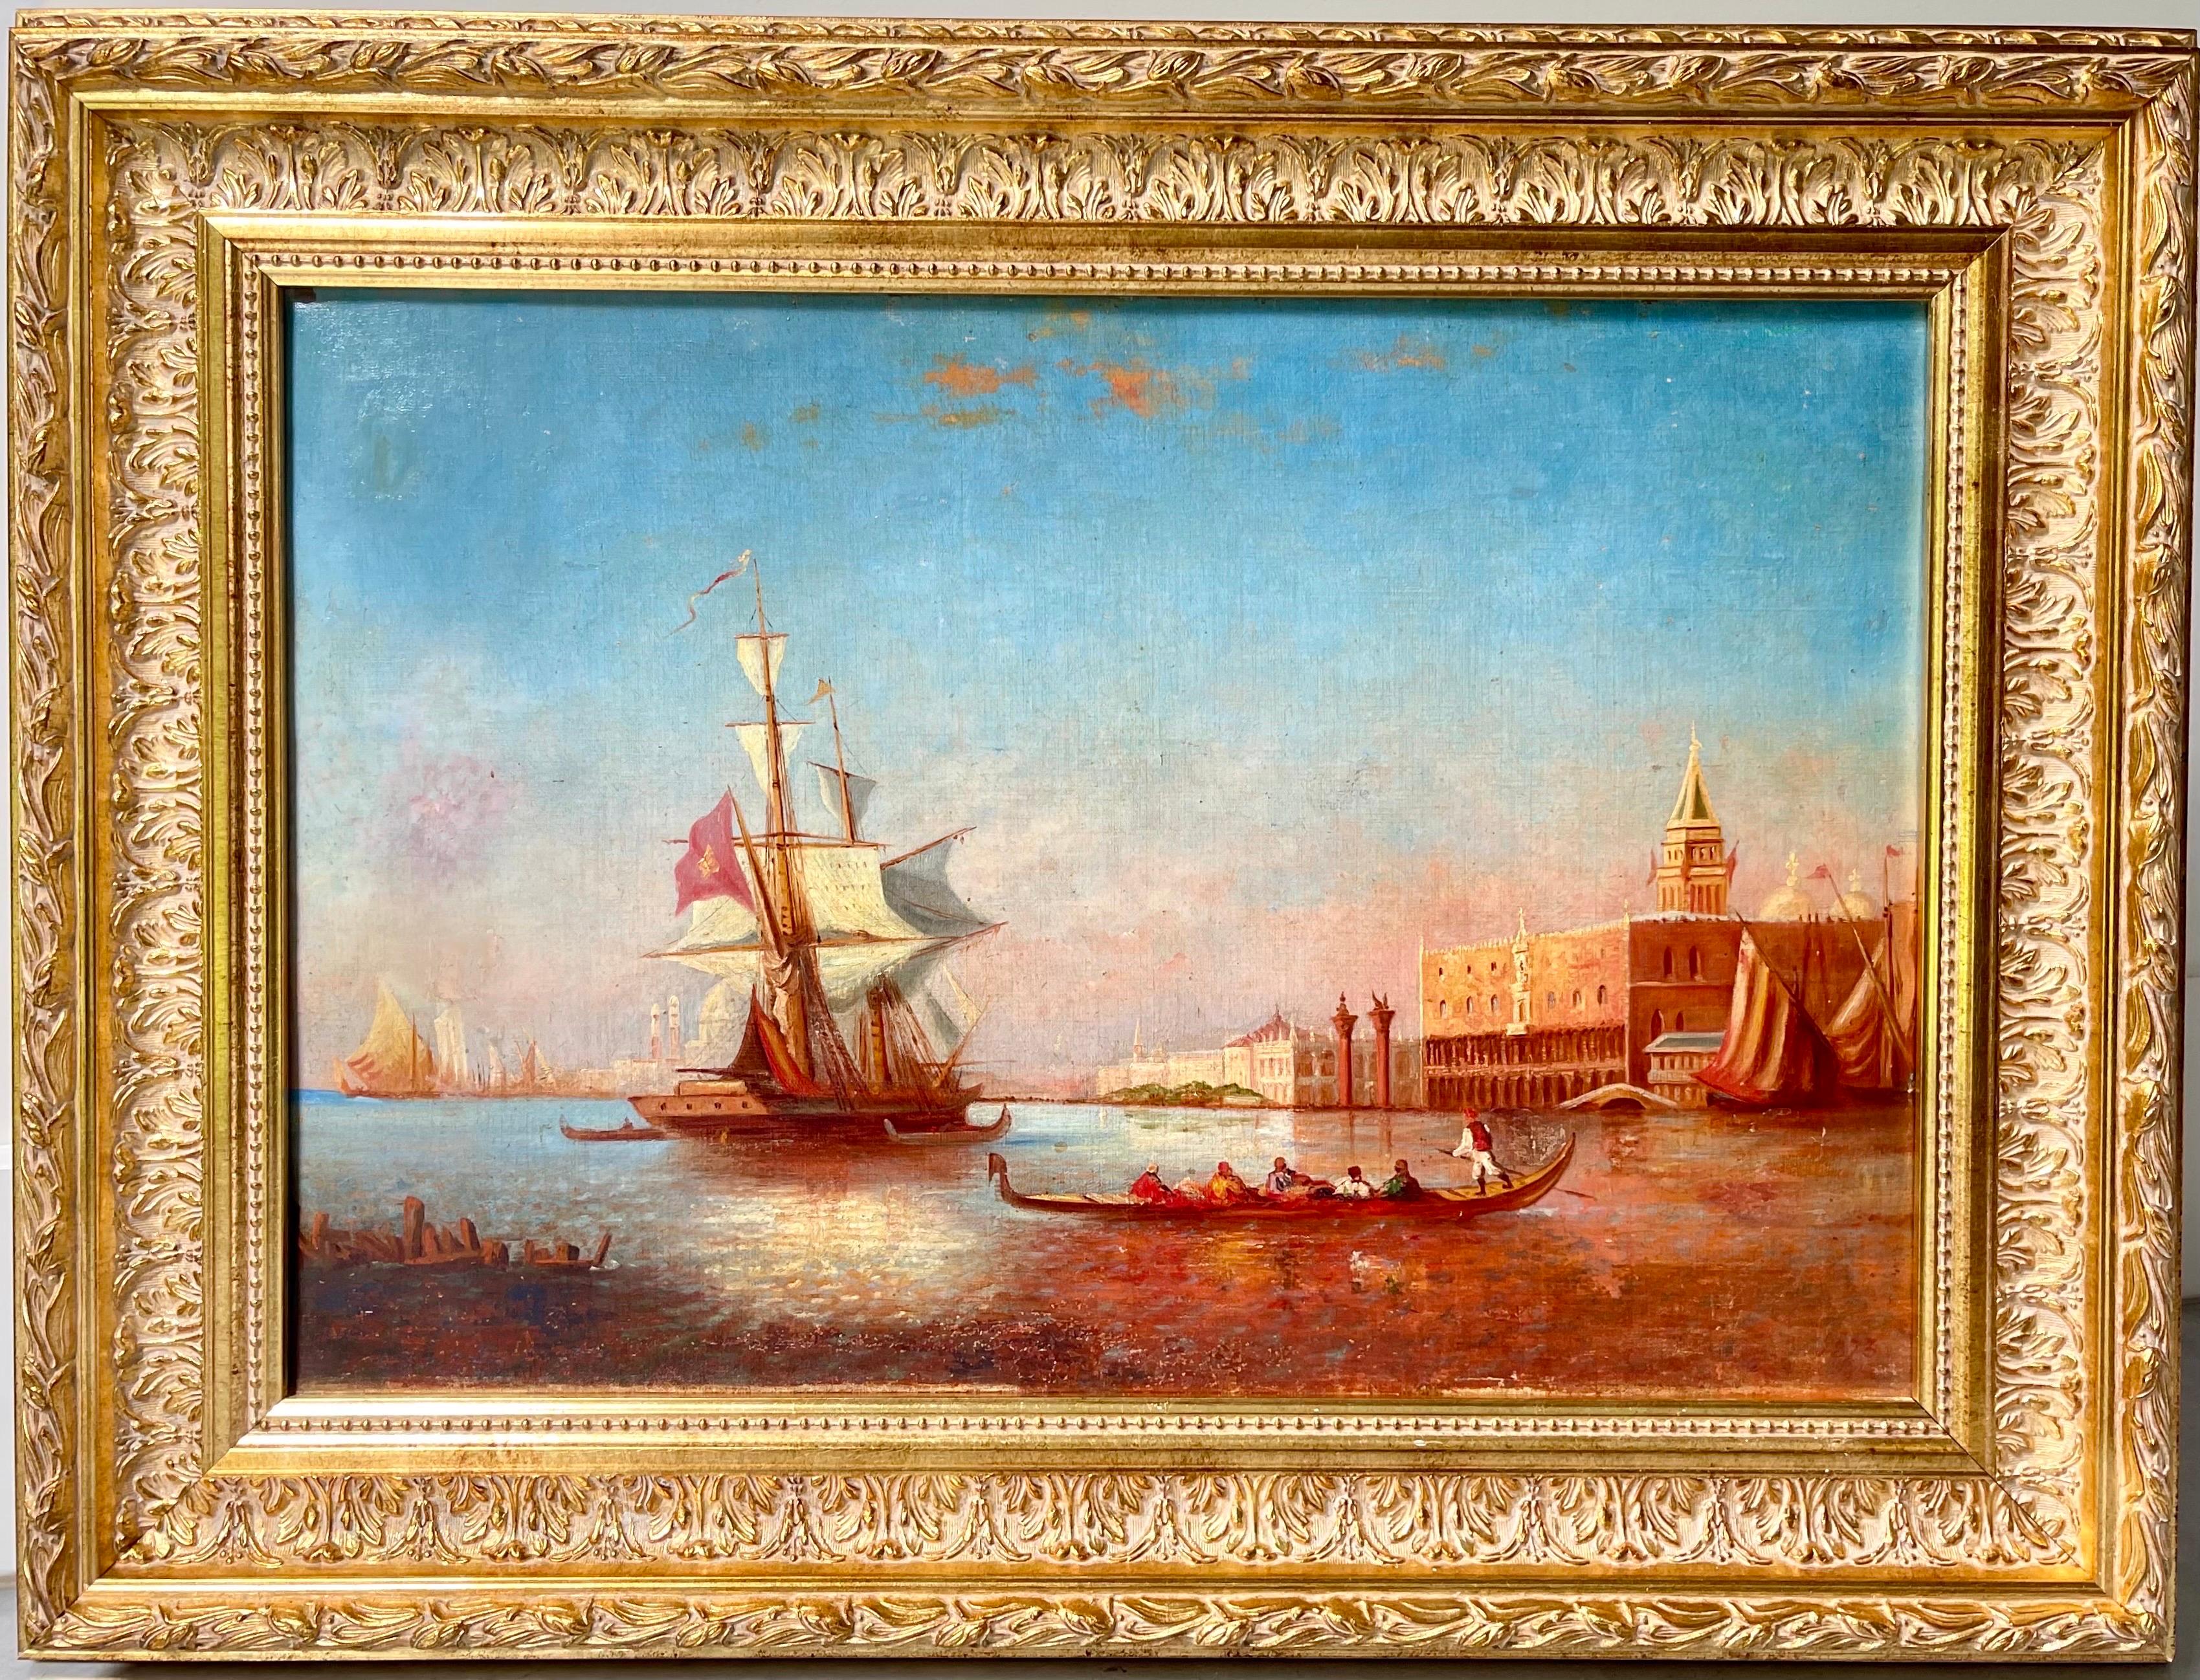 19th century romantic French painting - View of Venice - Ziem San Marco